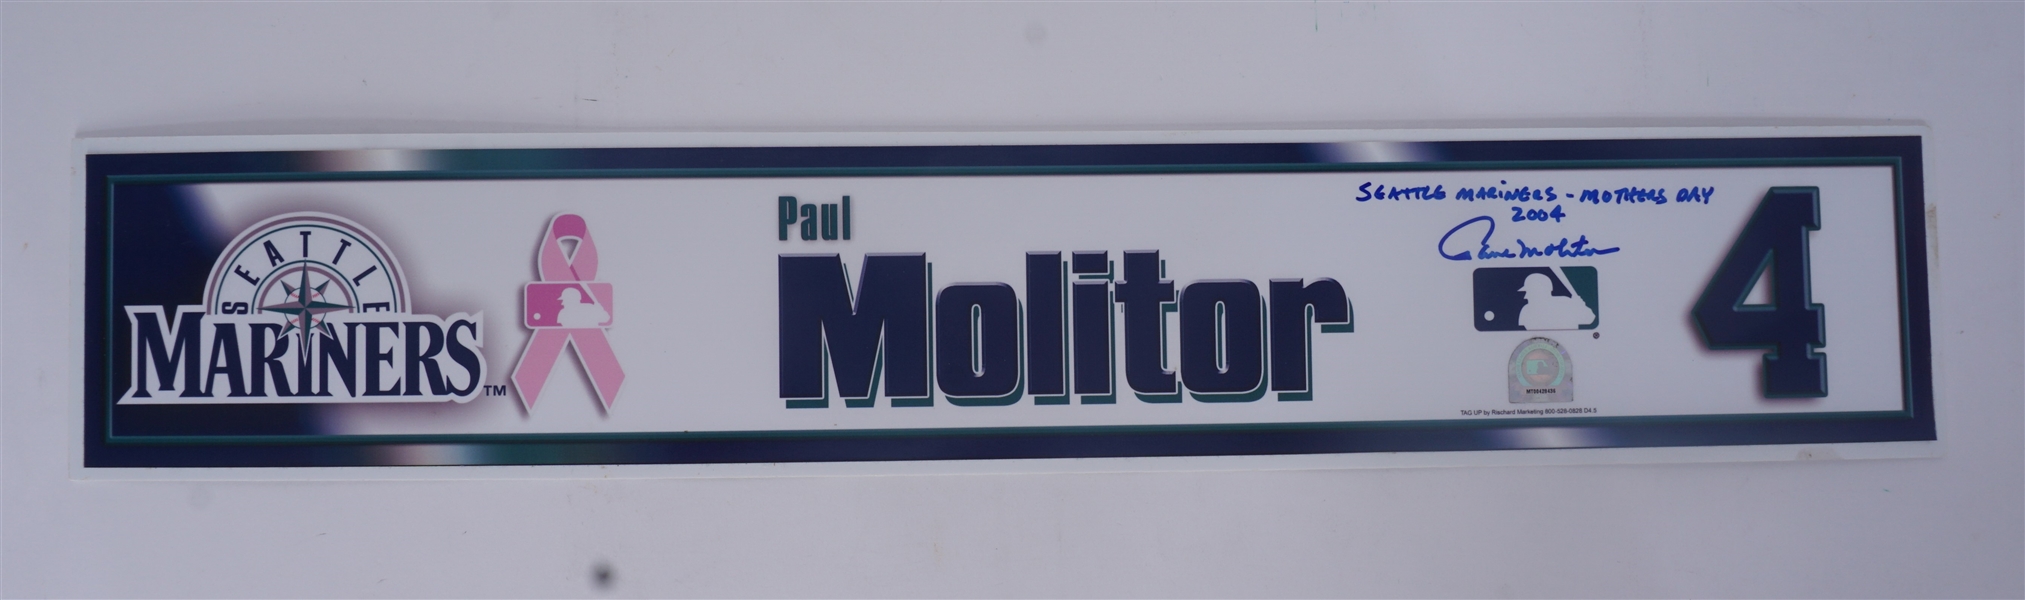 Paul Molitor Seattle Mariners 2004 Mothers Day Game Used Autographed & Inscribed Locker Name Plate MLB